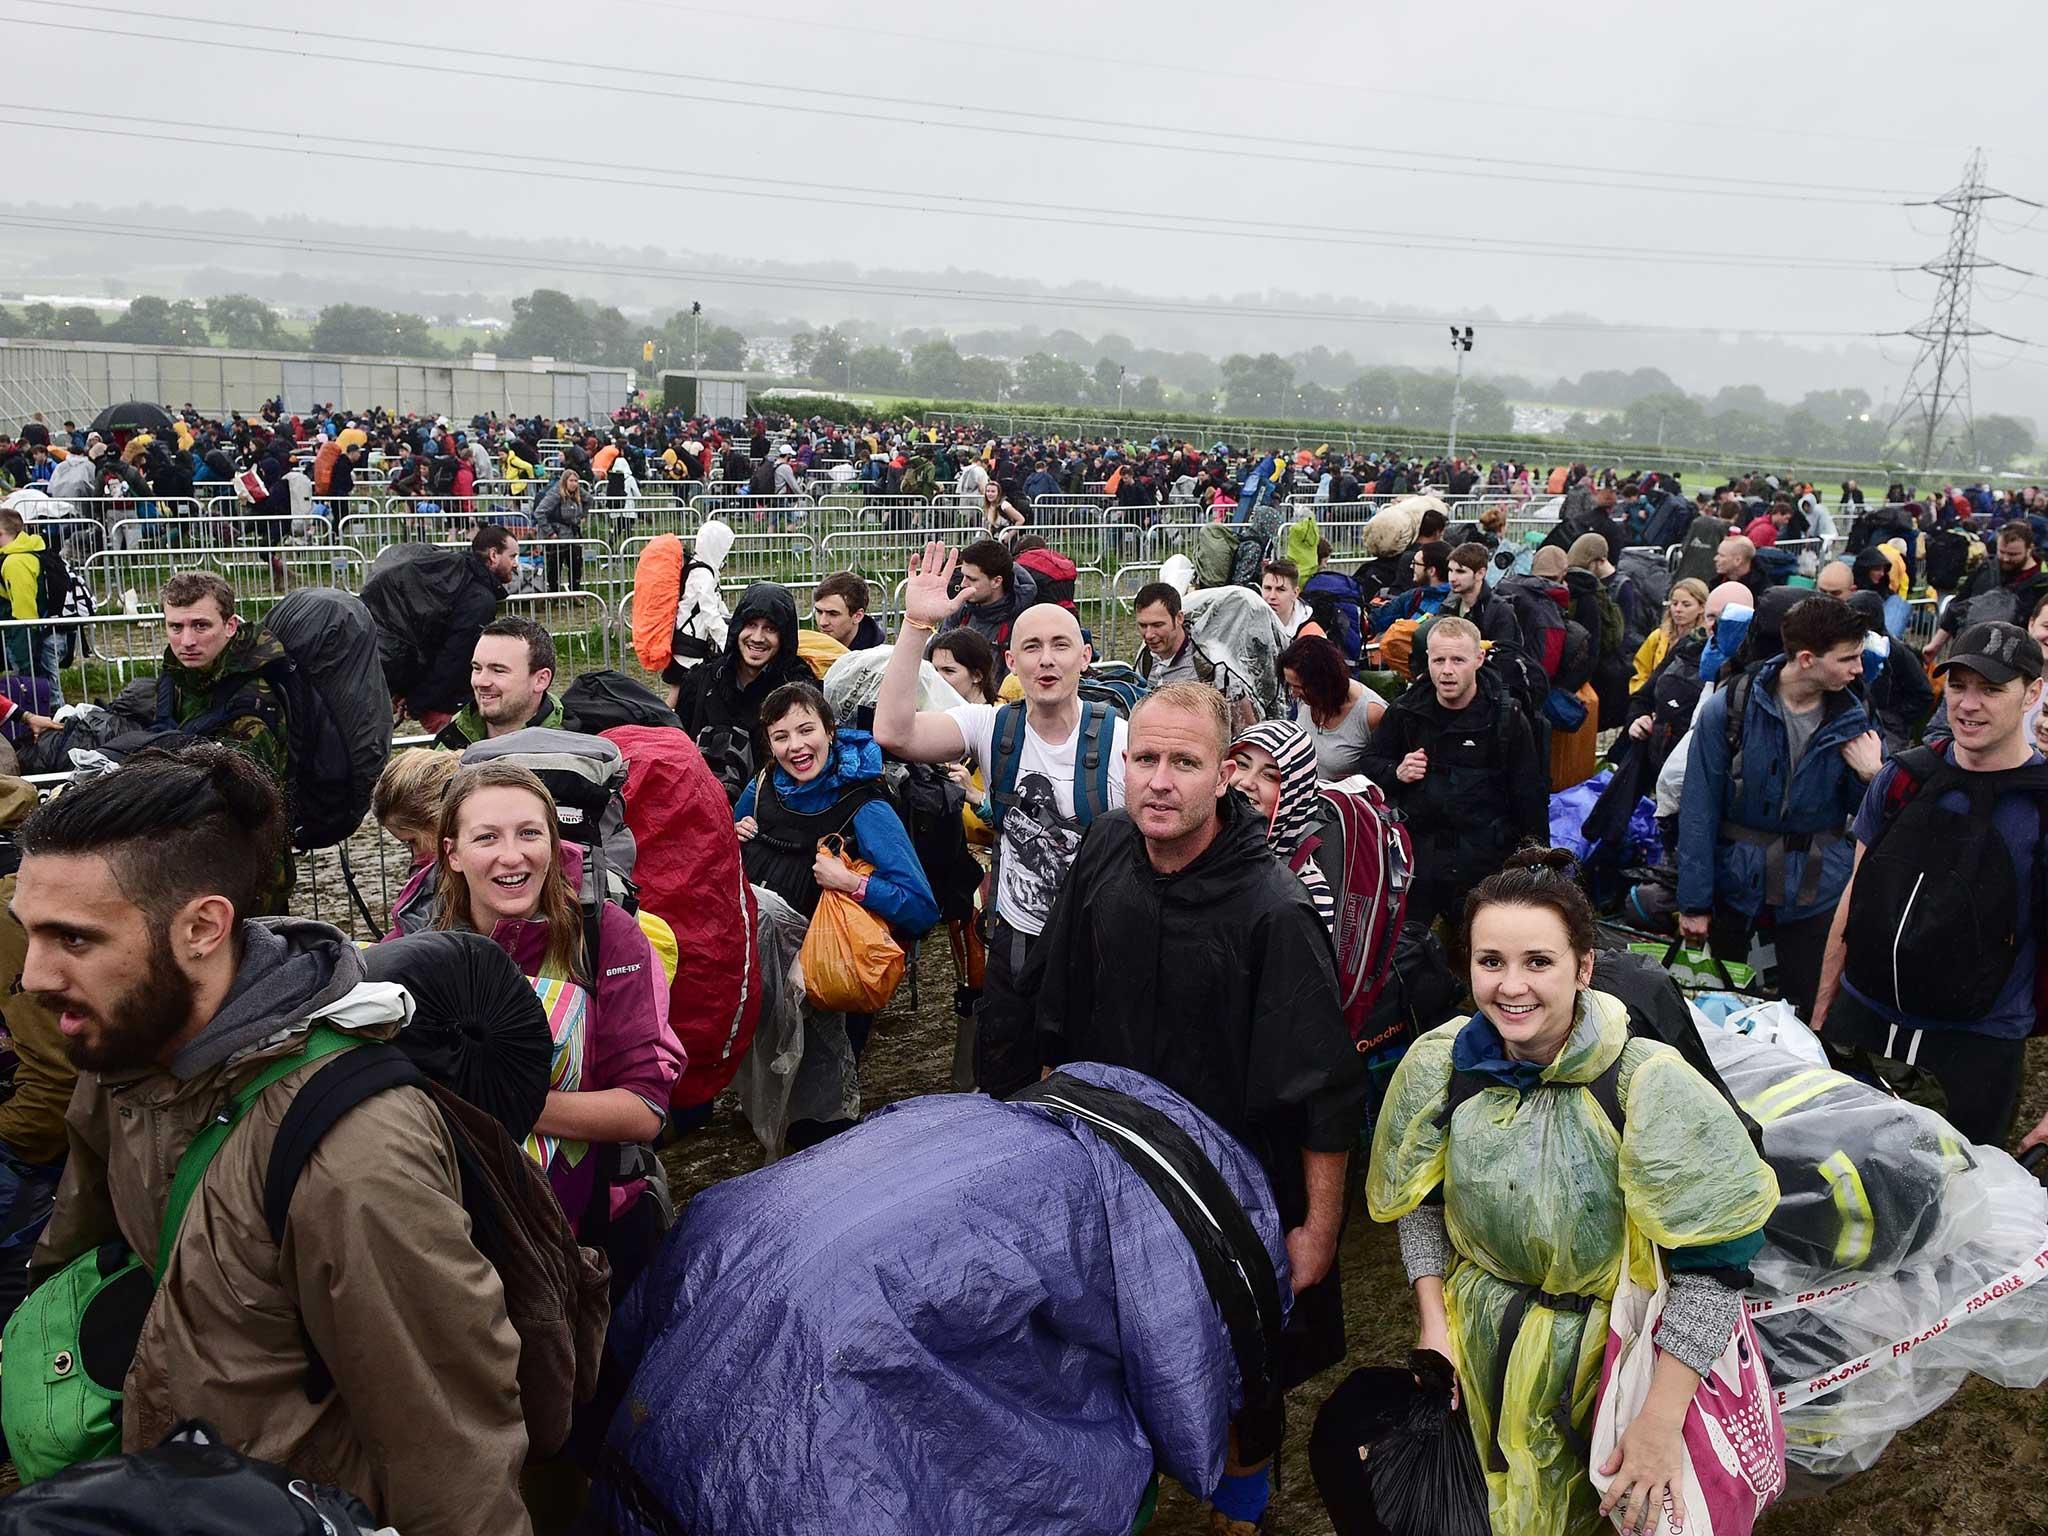 Glastonbury-goers arriving at Worthy Farm on Wednesday morning for three days of music